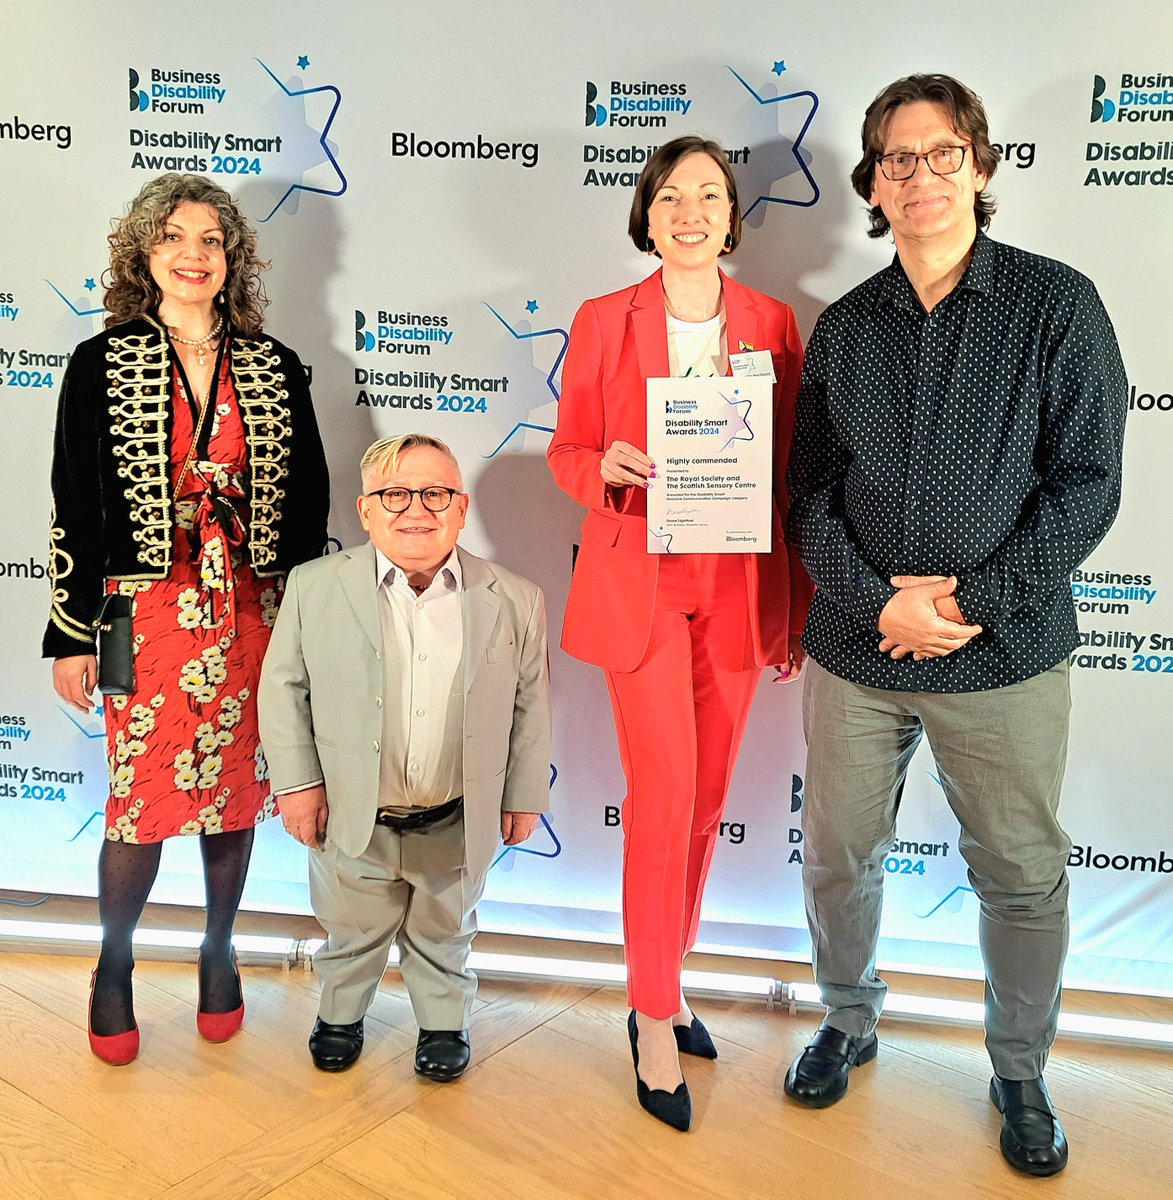 The @ScottishSensory Centre and the Royal Society were delighted to be awarded Highly commended in the @DisabilitySmart Inclusive Communication Campaign Award, for developing new #BSL signs for environmental science! Congratulations to all involved! businessdisabilityforum.org.uk/awards-2024-wi…